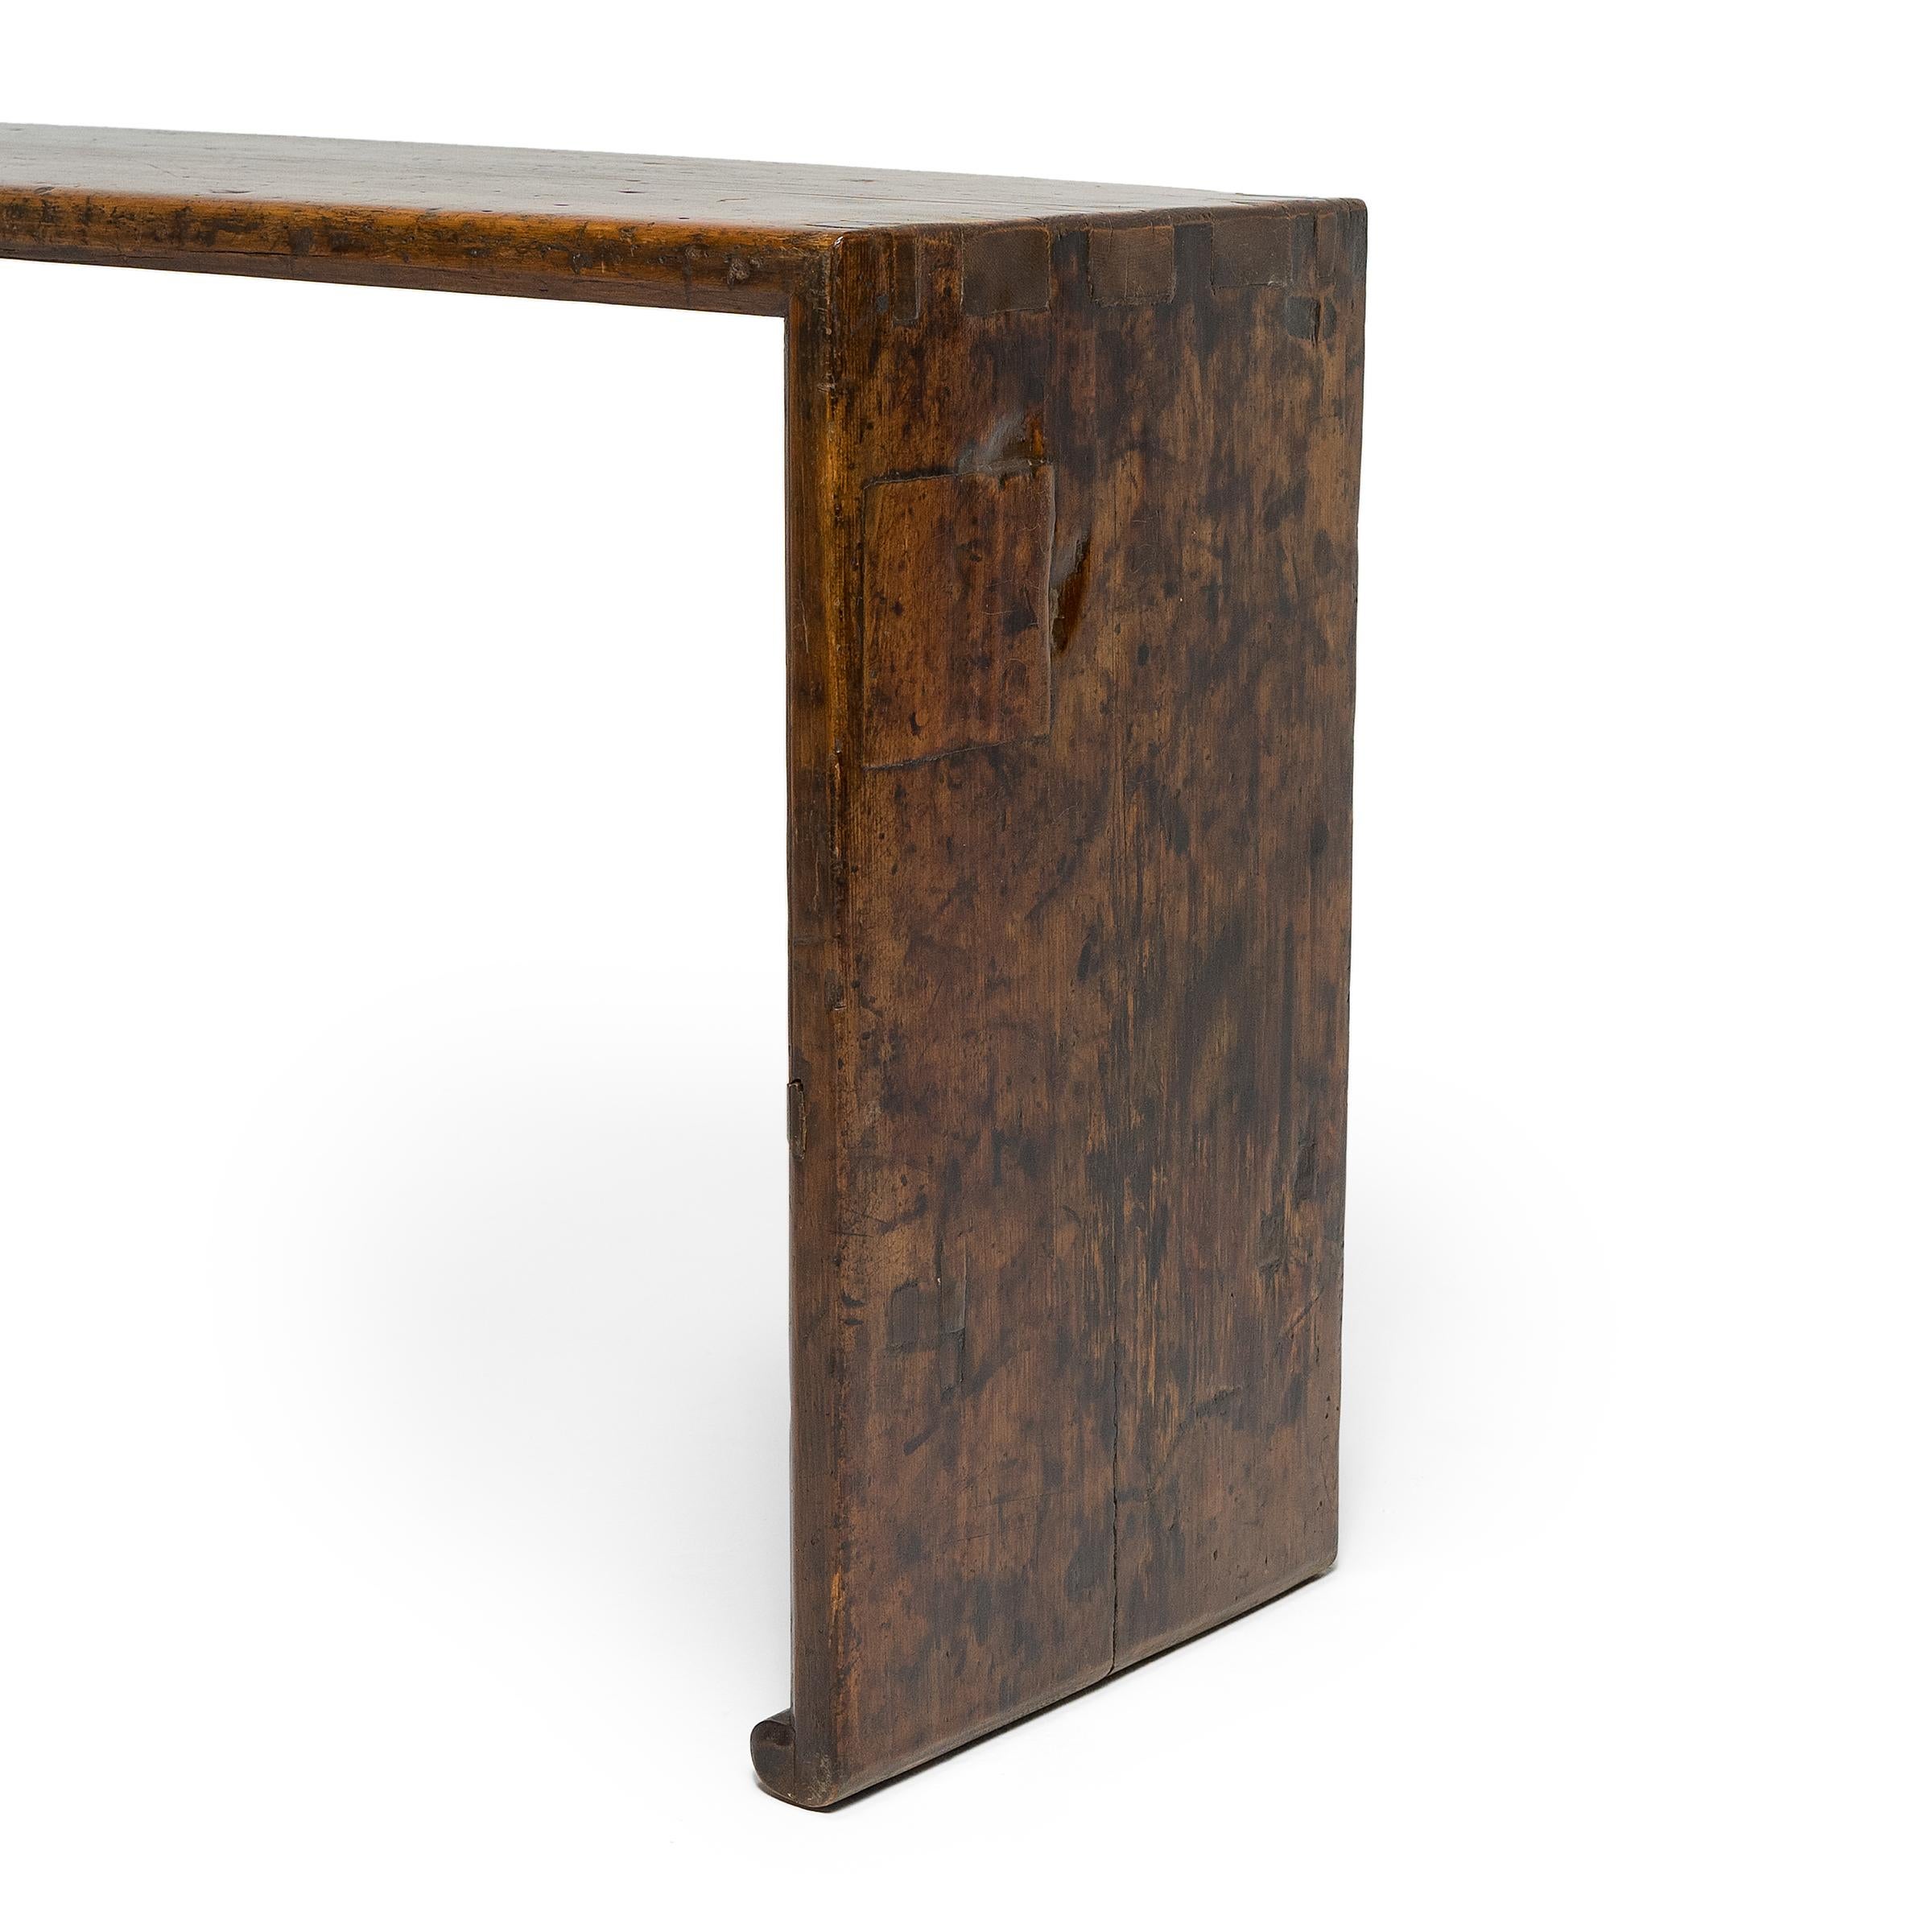 Elegant Chinese Waterfall Altar Table, c. 1850 For Sale 1